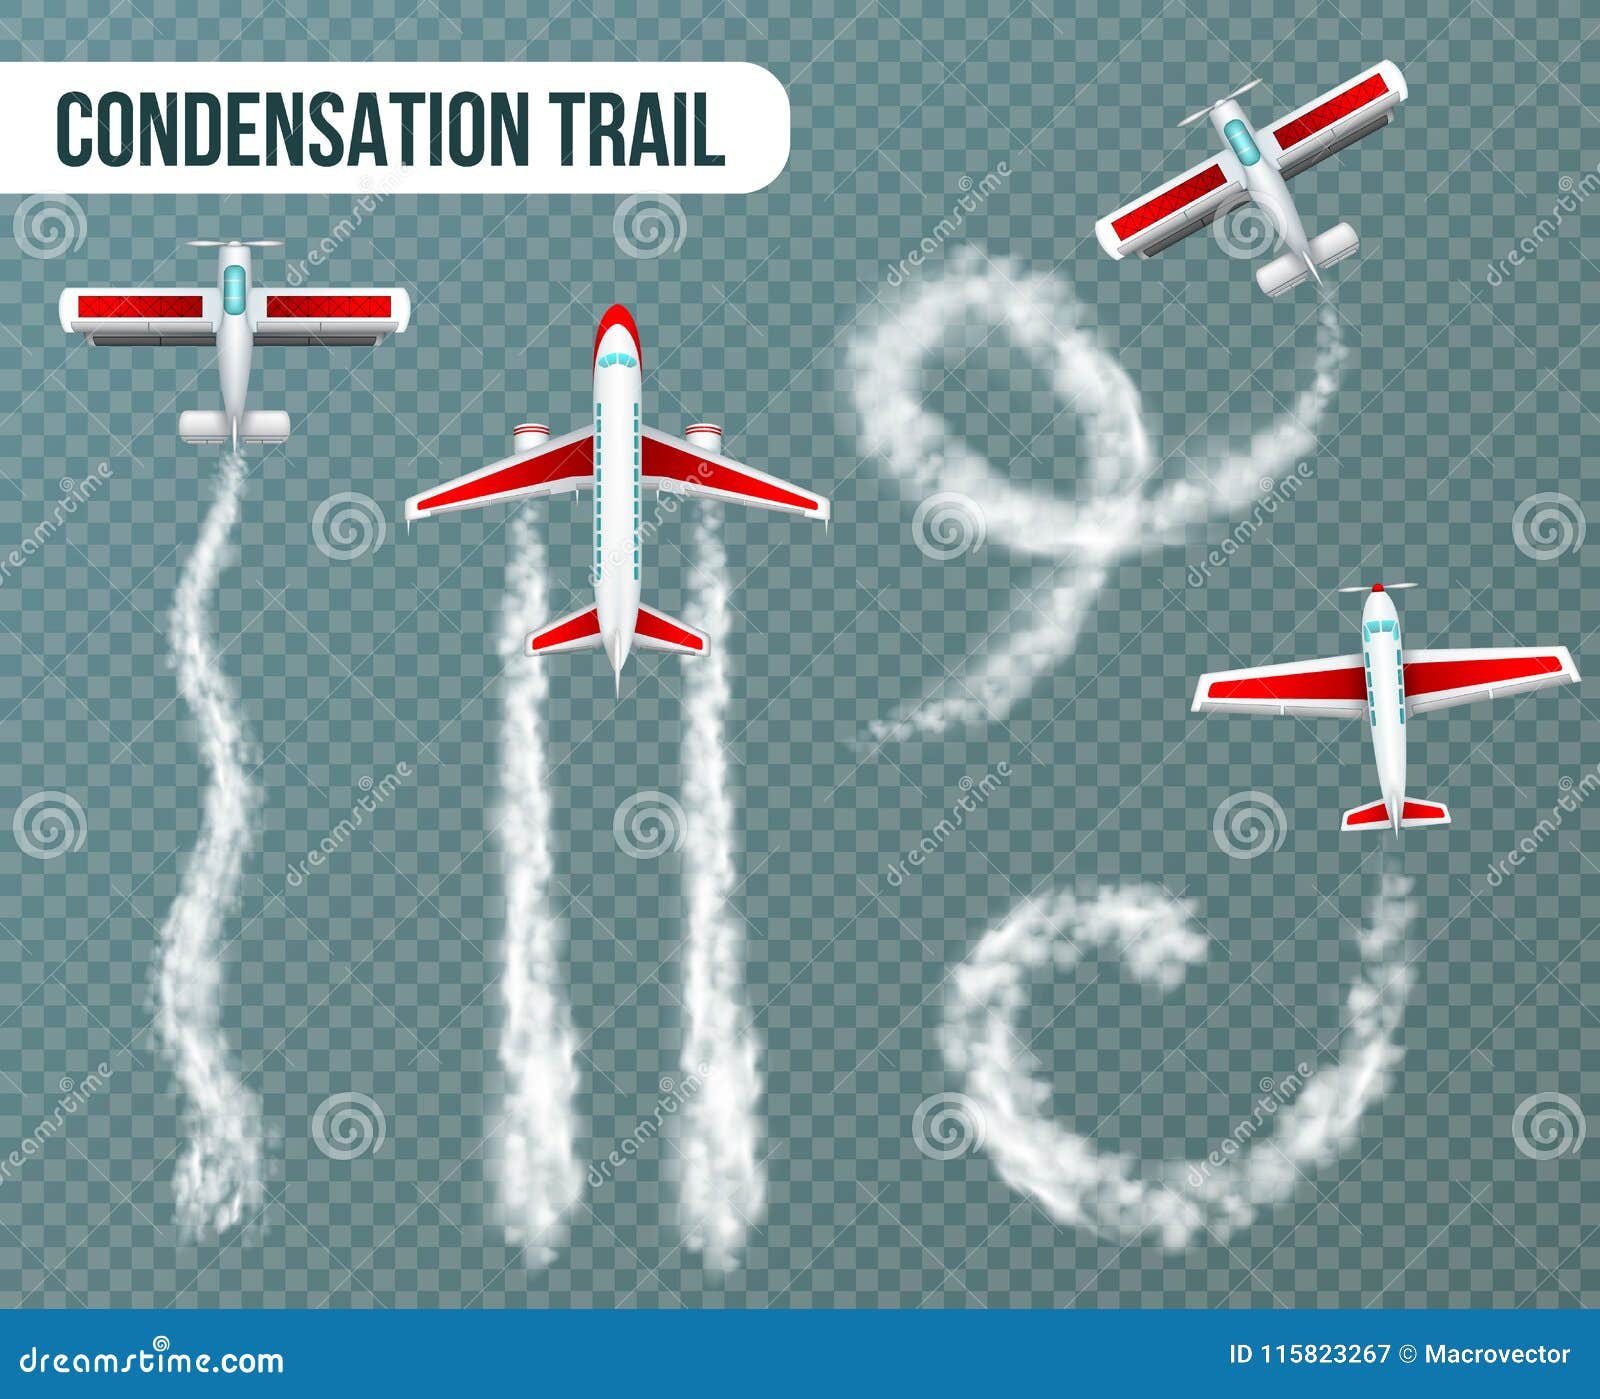 Airplane Condensation Trails Jet Trailing Smoke Isolated Vector Set